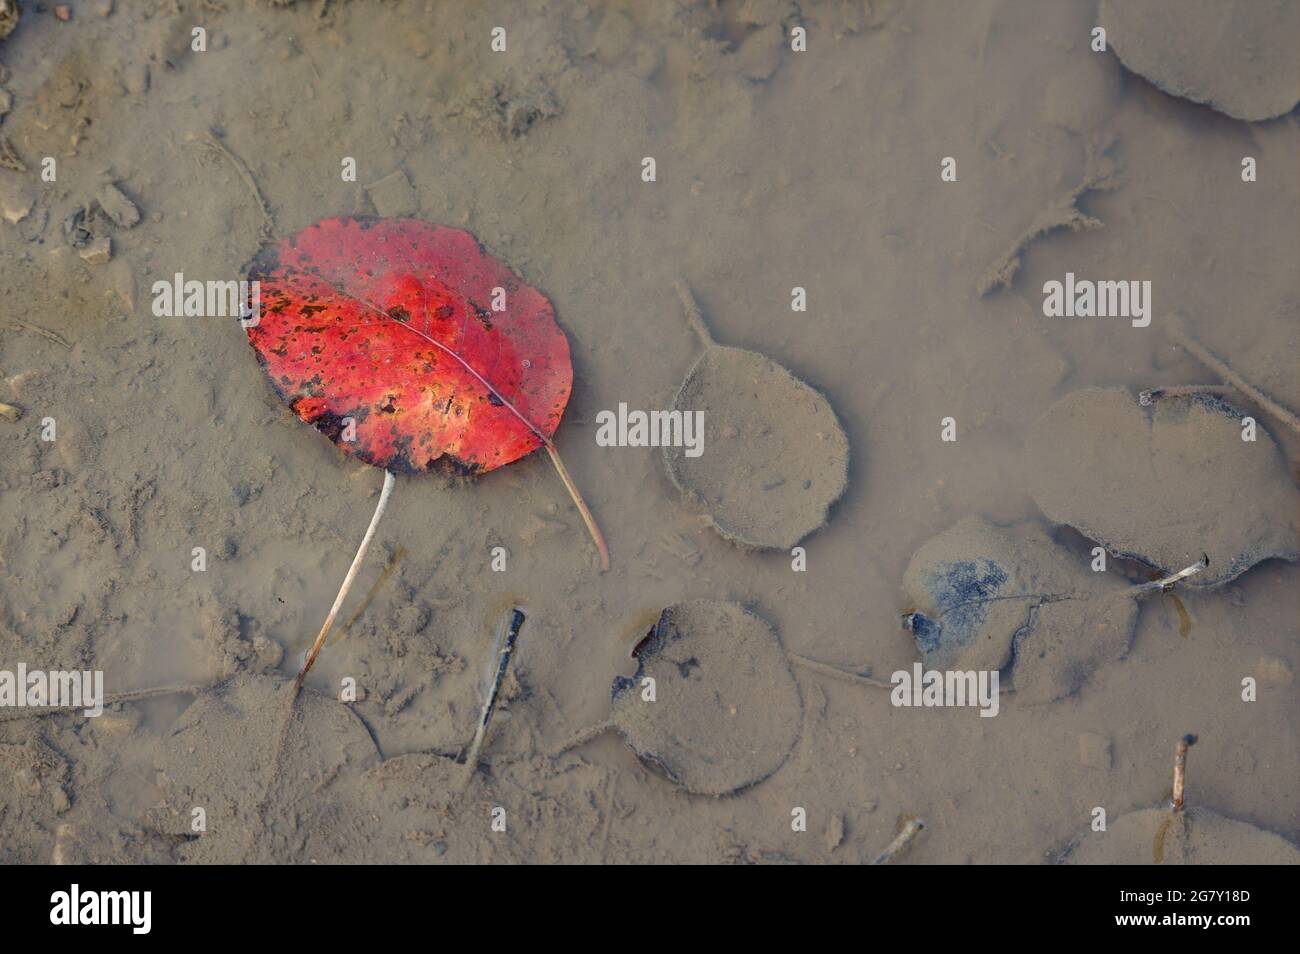 A red colored foliage lies in a muddy, brown rain puddle. Stock Photo